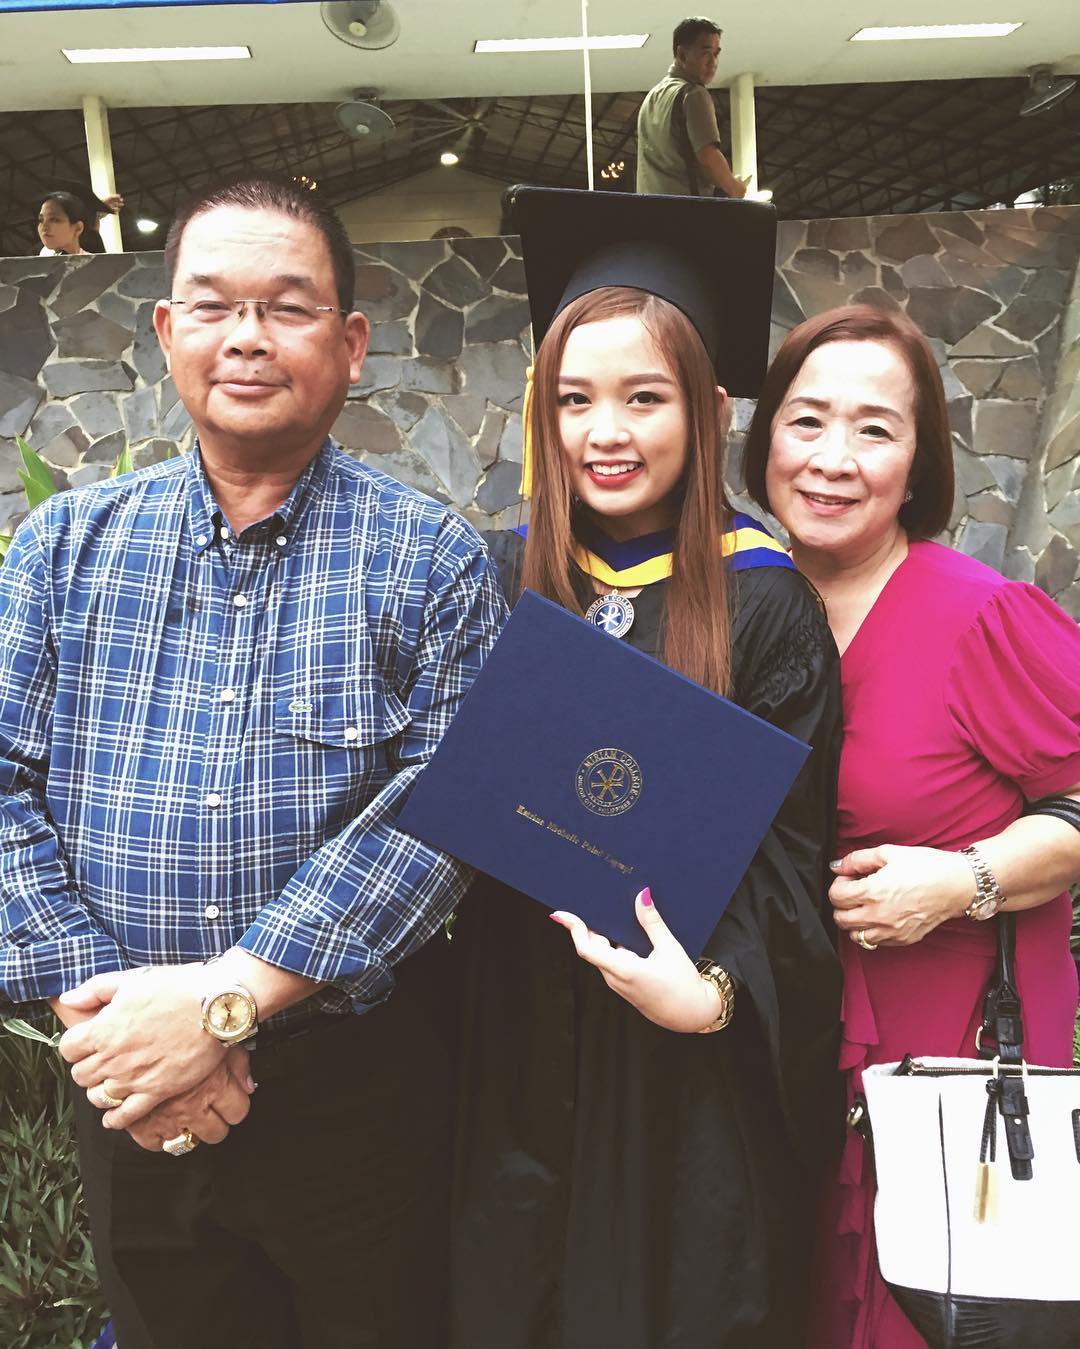 Pin on Goin' Bulilit Graduates Now All Grown Up